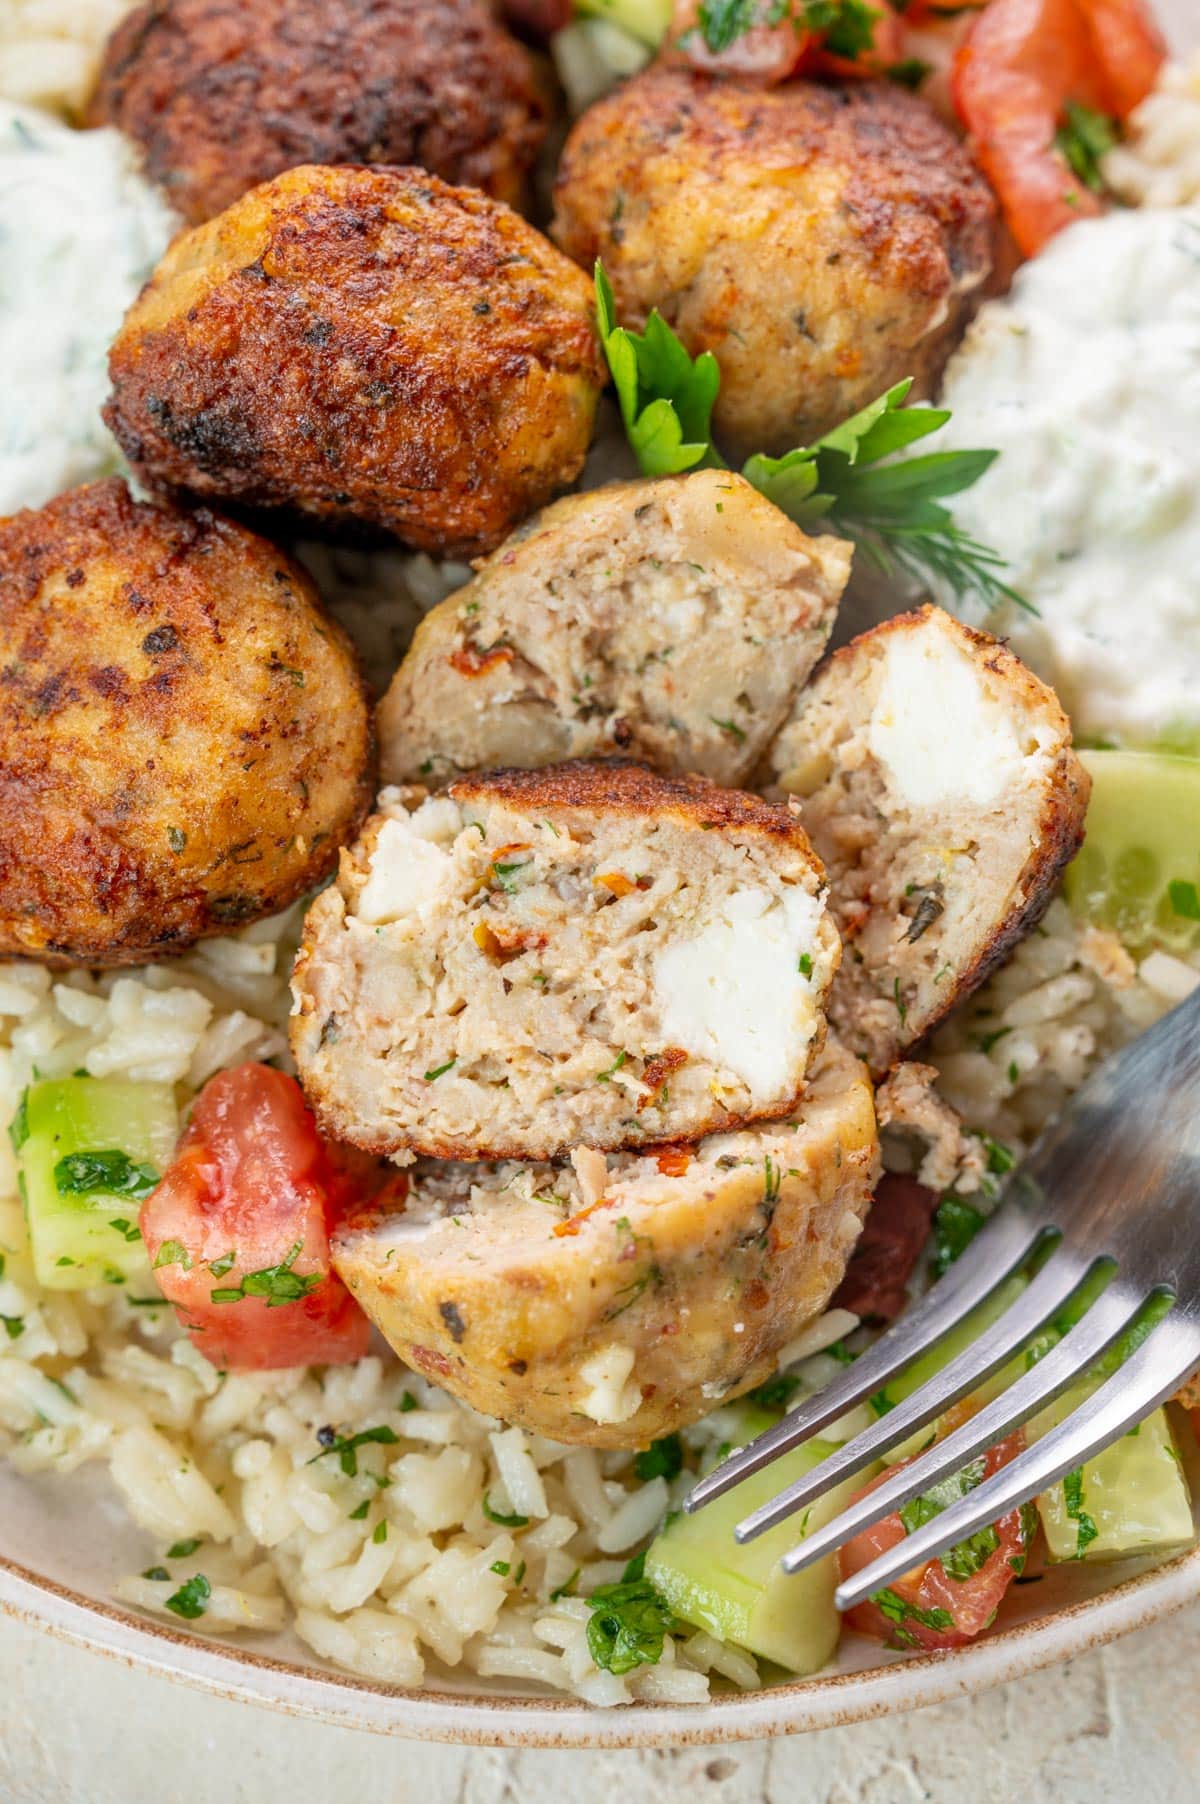 A close up photo of Greek Chicken Meatballs with rice and tomato cucumber salad on a plate. Meatballs are cut in half to show the inside.